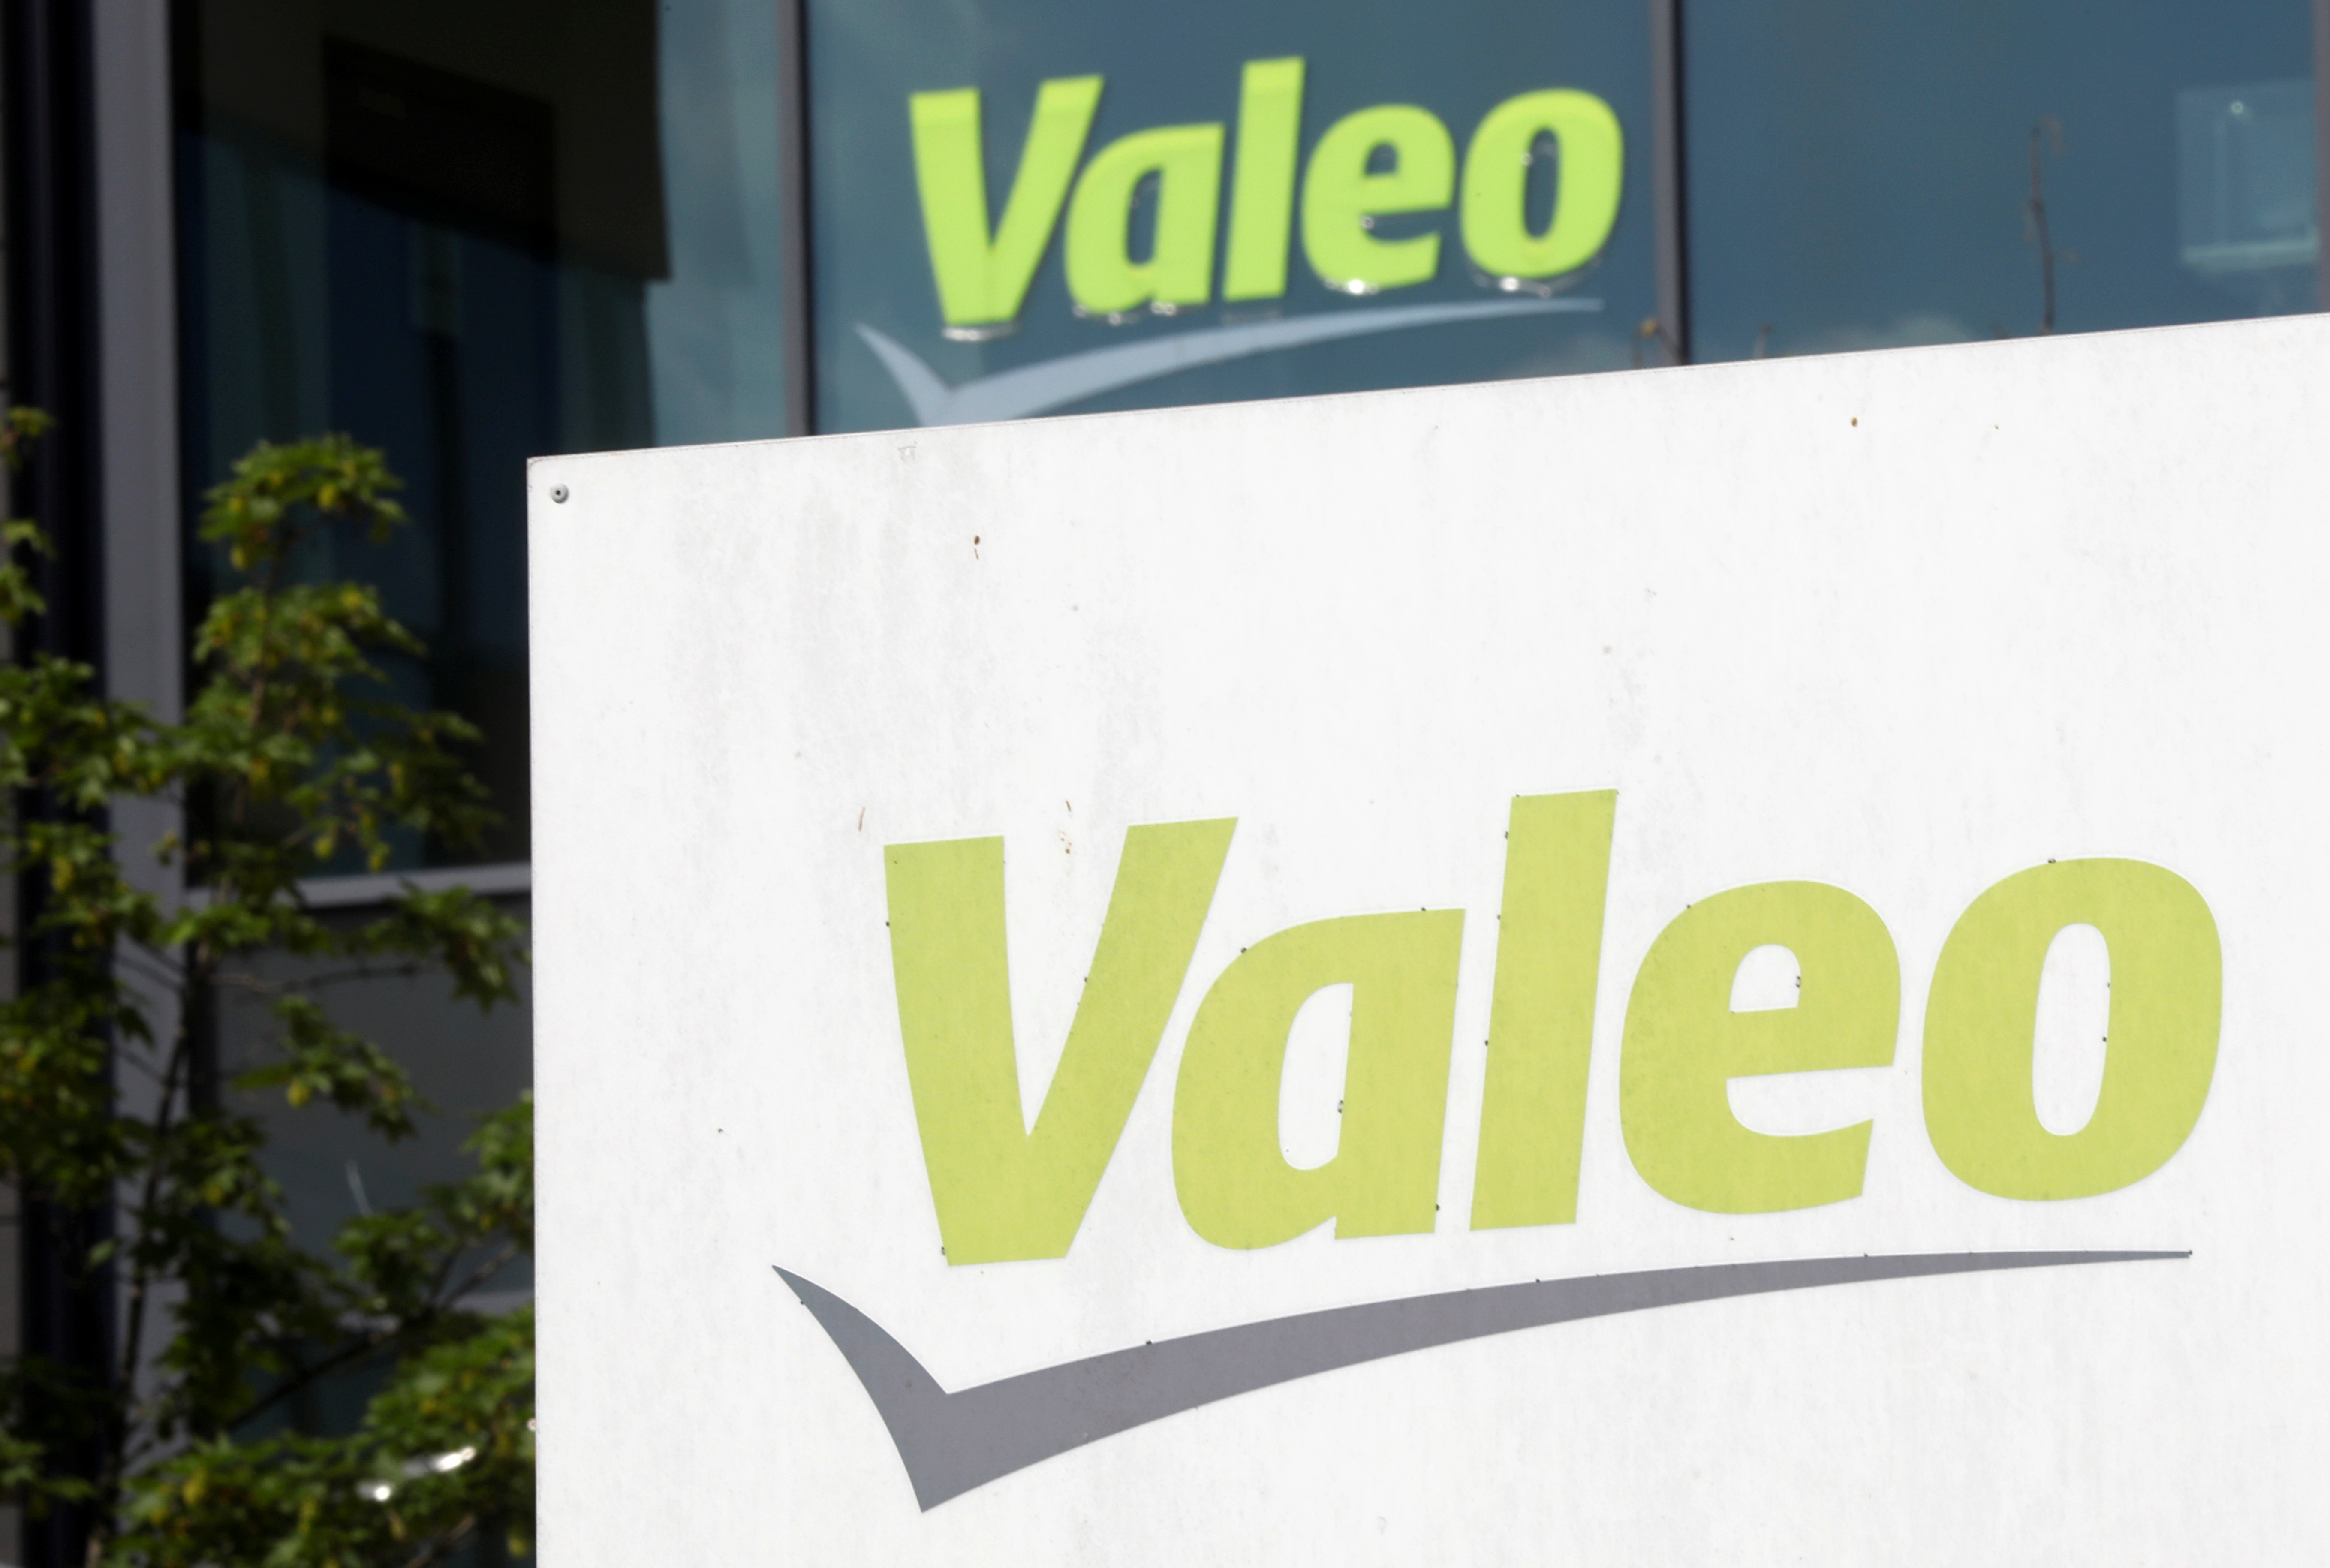 France's Valeo partners with California's ZutaCore on data centers cooling  system